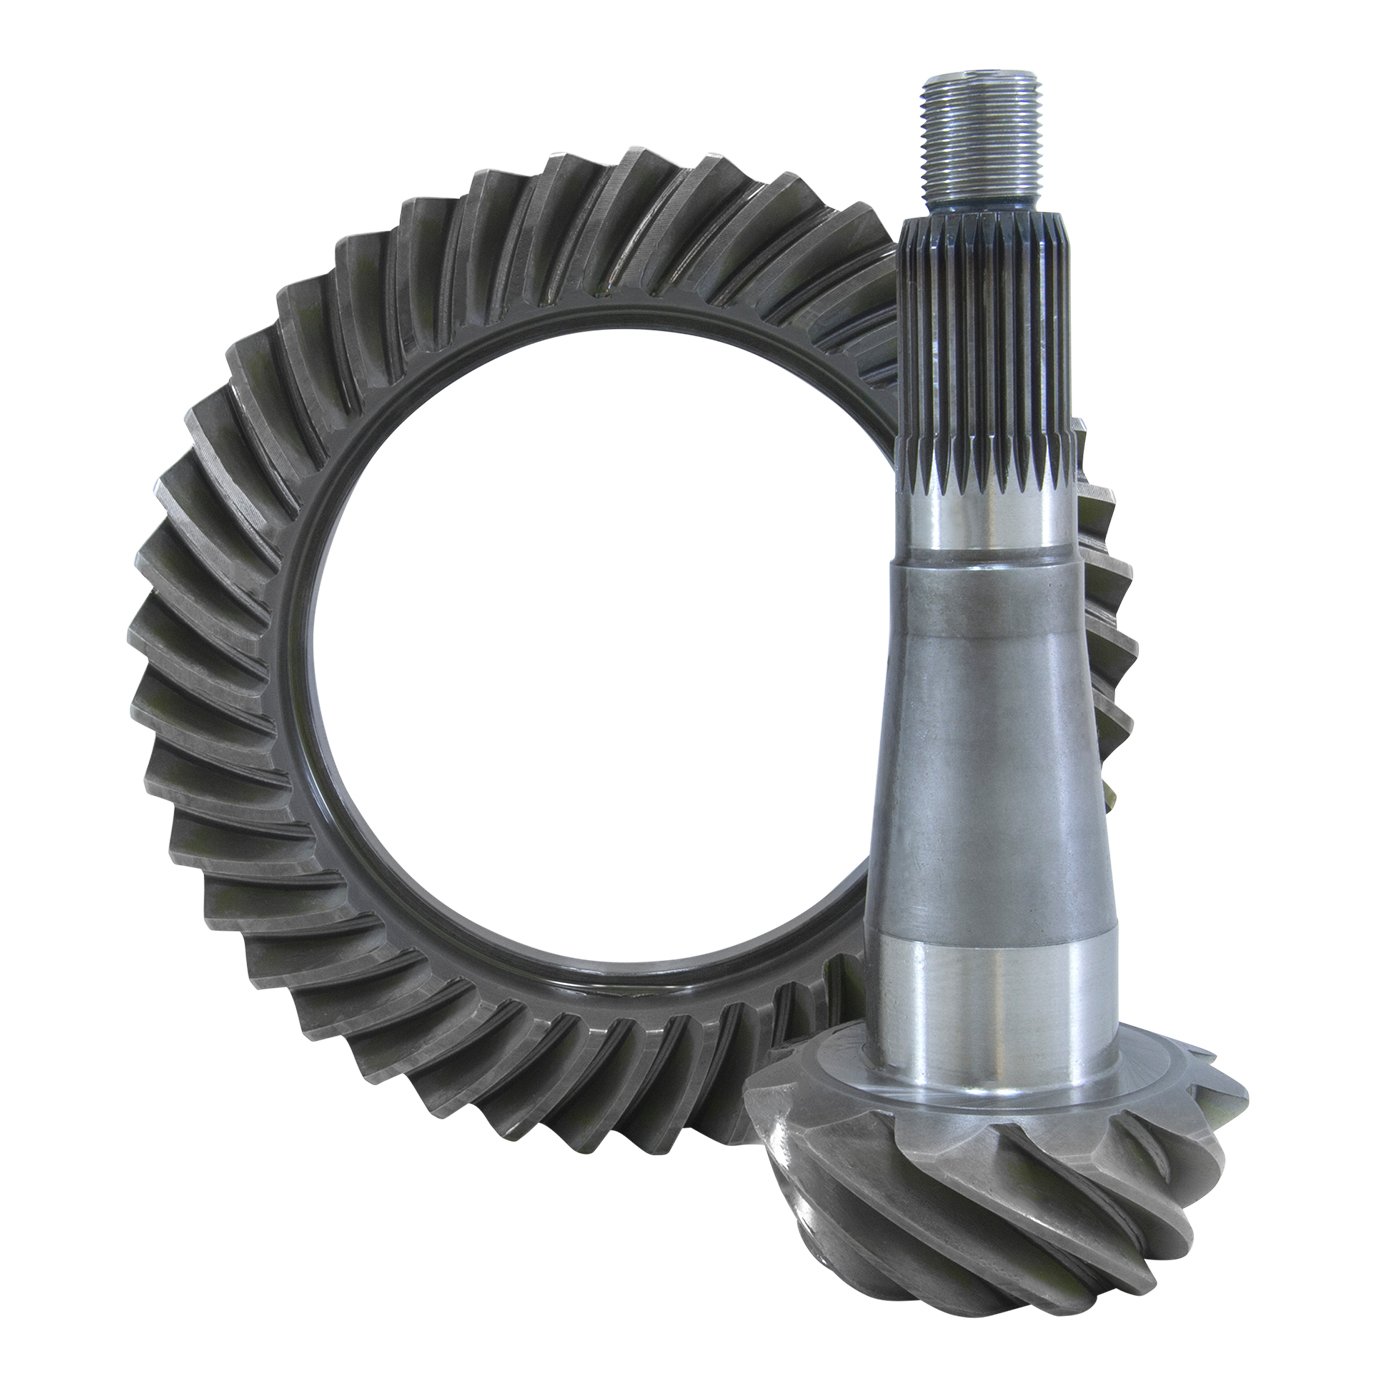 USA Standard ZG C8.89-373 Ring & Pinion Gear Set, For Chrysler 8.75 in. W/89 Housing , 3.73 Ratio